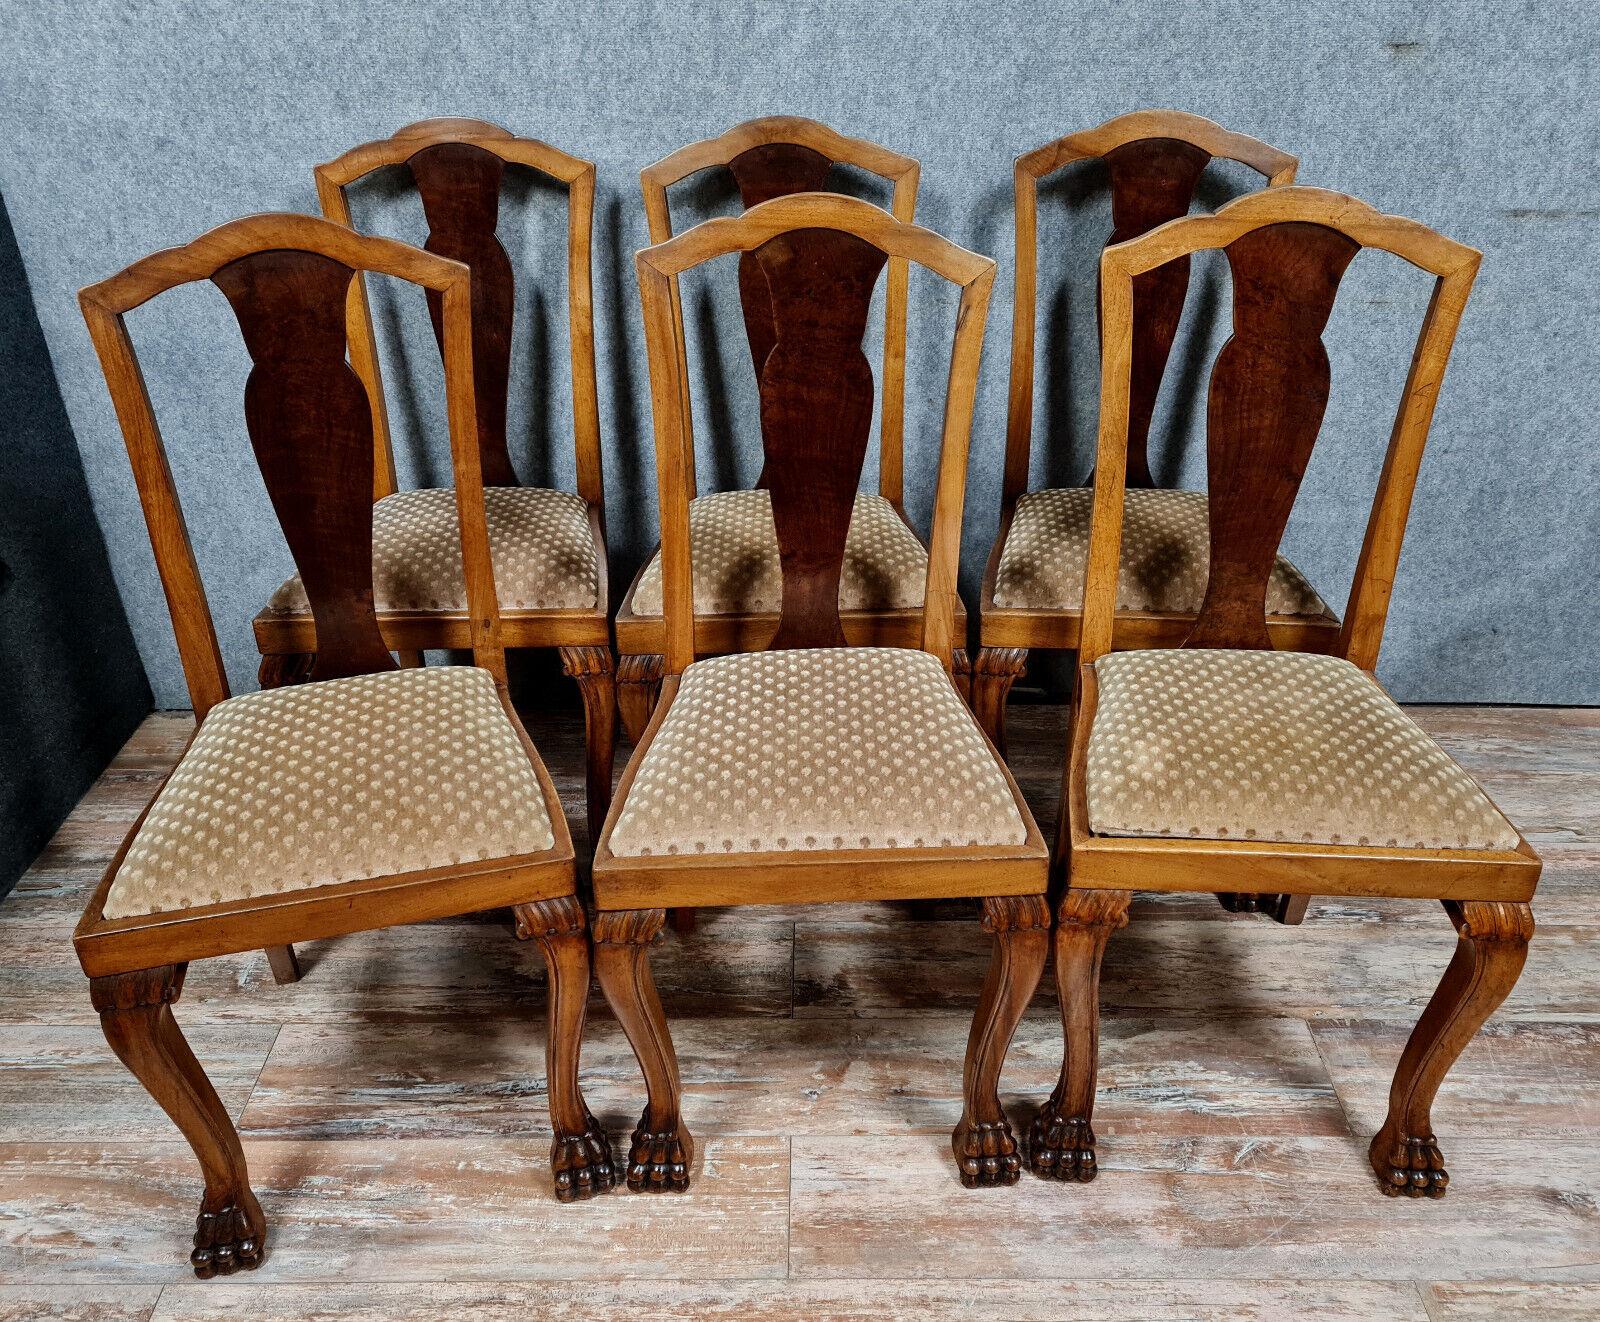 Enhance your dining experience with this exquisite set of 6 Chippendale chairs, crafted in alternating light and dark mahogany tones around 1880-1900. Each chair features plush velvet-style Genoese fabric seats, intricately pierced backs, and